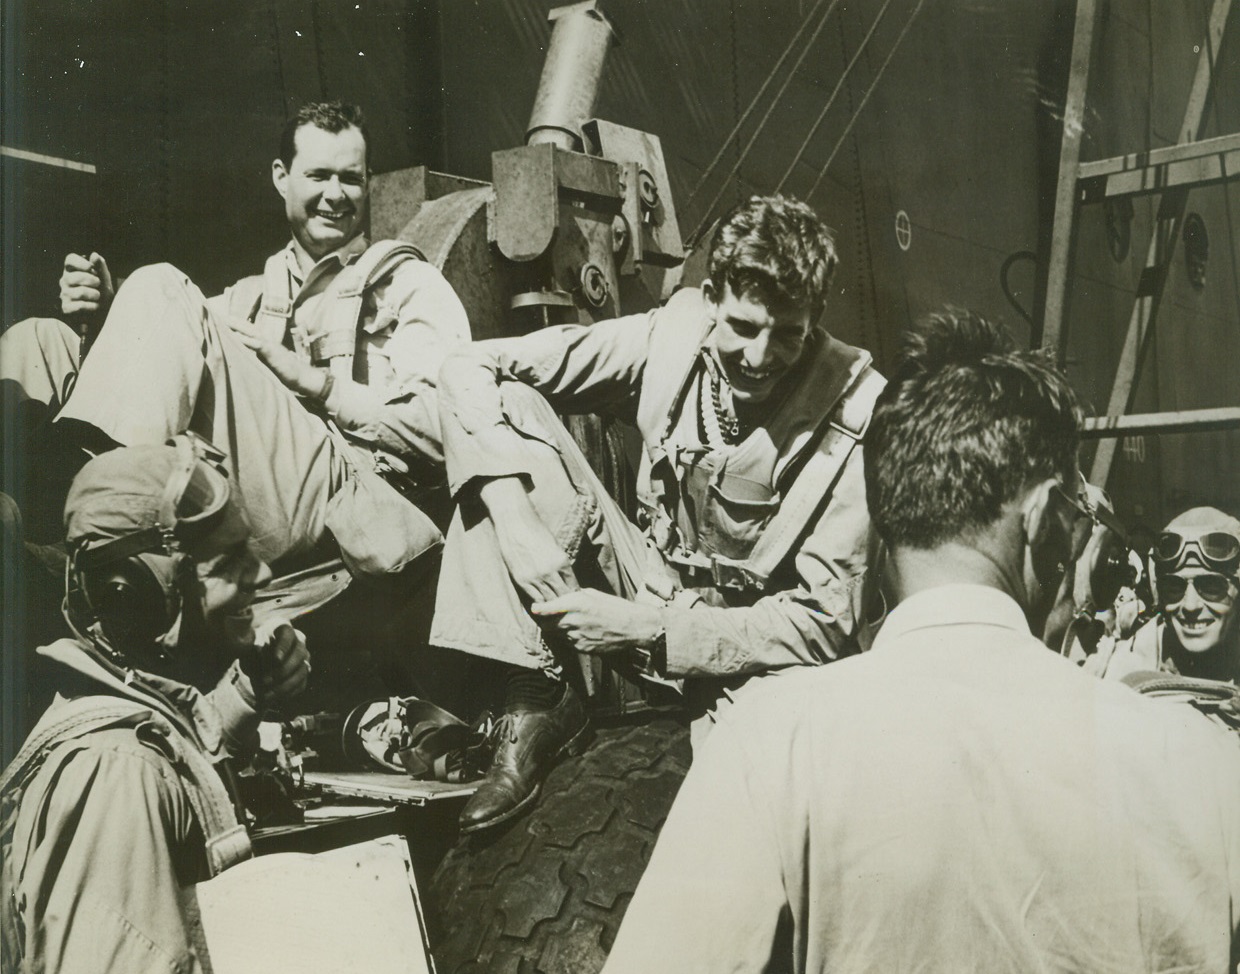 Rehashing Victory, 8/23/1944. At Sea – Relieved grins light the faces of air group 16 pilots as they discuss a victorious clash with Jap planes, after their return to their carrier.  Seated (top) are; (left to right) Comdr. P.D. Buie of Nashville, GA; and Ensign W.J. Seyfferle, Cincinnati, O.  Lower left: Ensign Edward G. Wendorf, West (co), Texas.  With back toward camera: Comdr. L.B. Southerland, USN.  Extreme right: Lt. (jg) Frances M. Fleming, Portland, Ore. Credit line (official U.S. Navy photo from ACME);